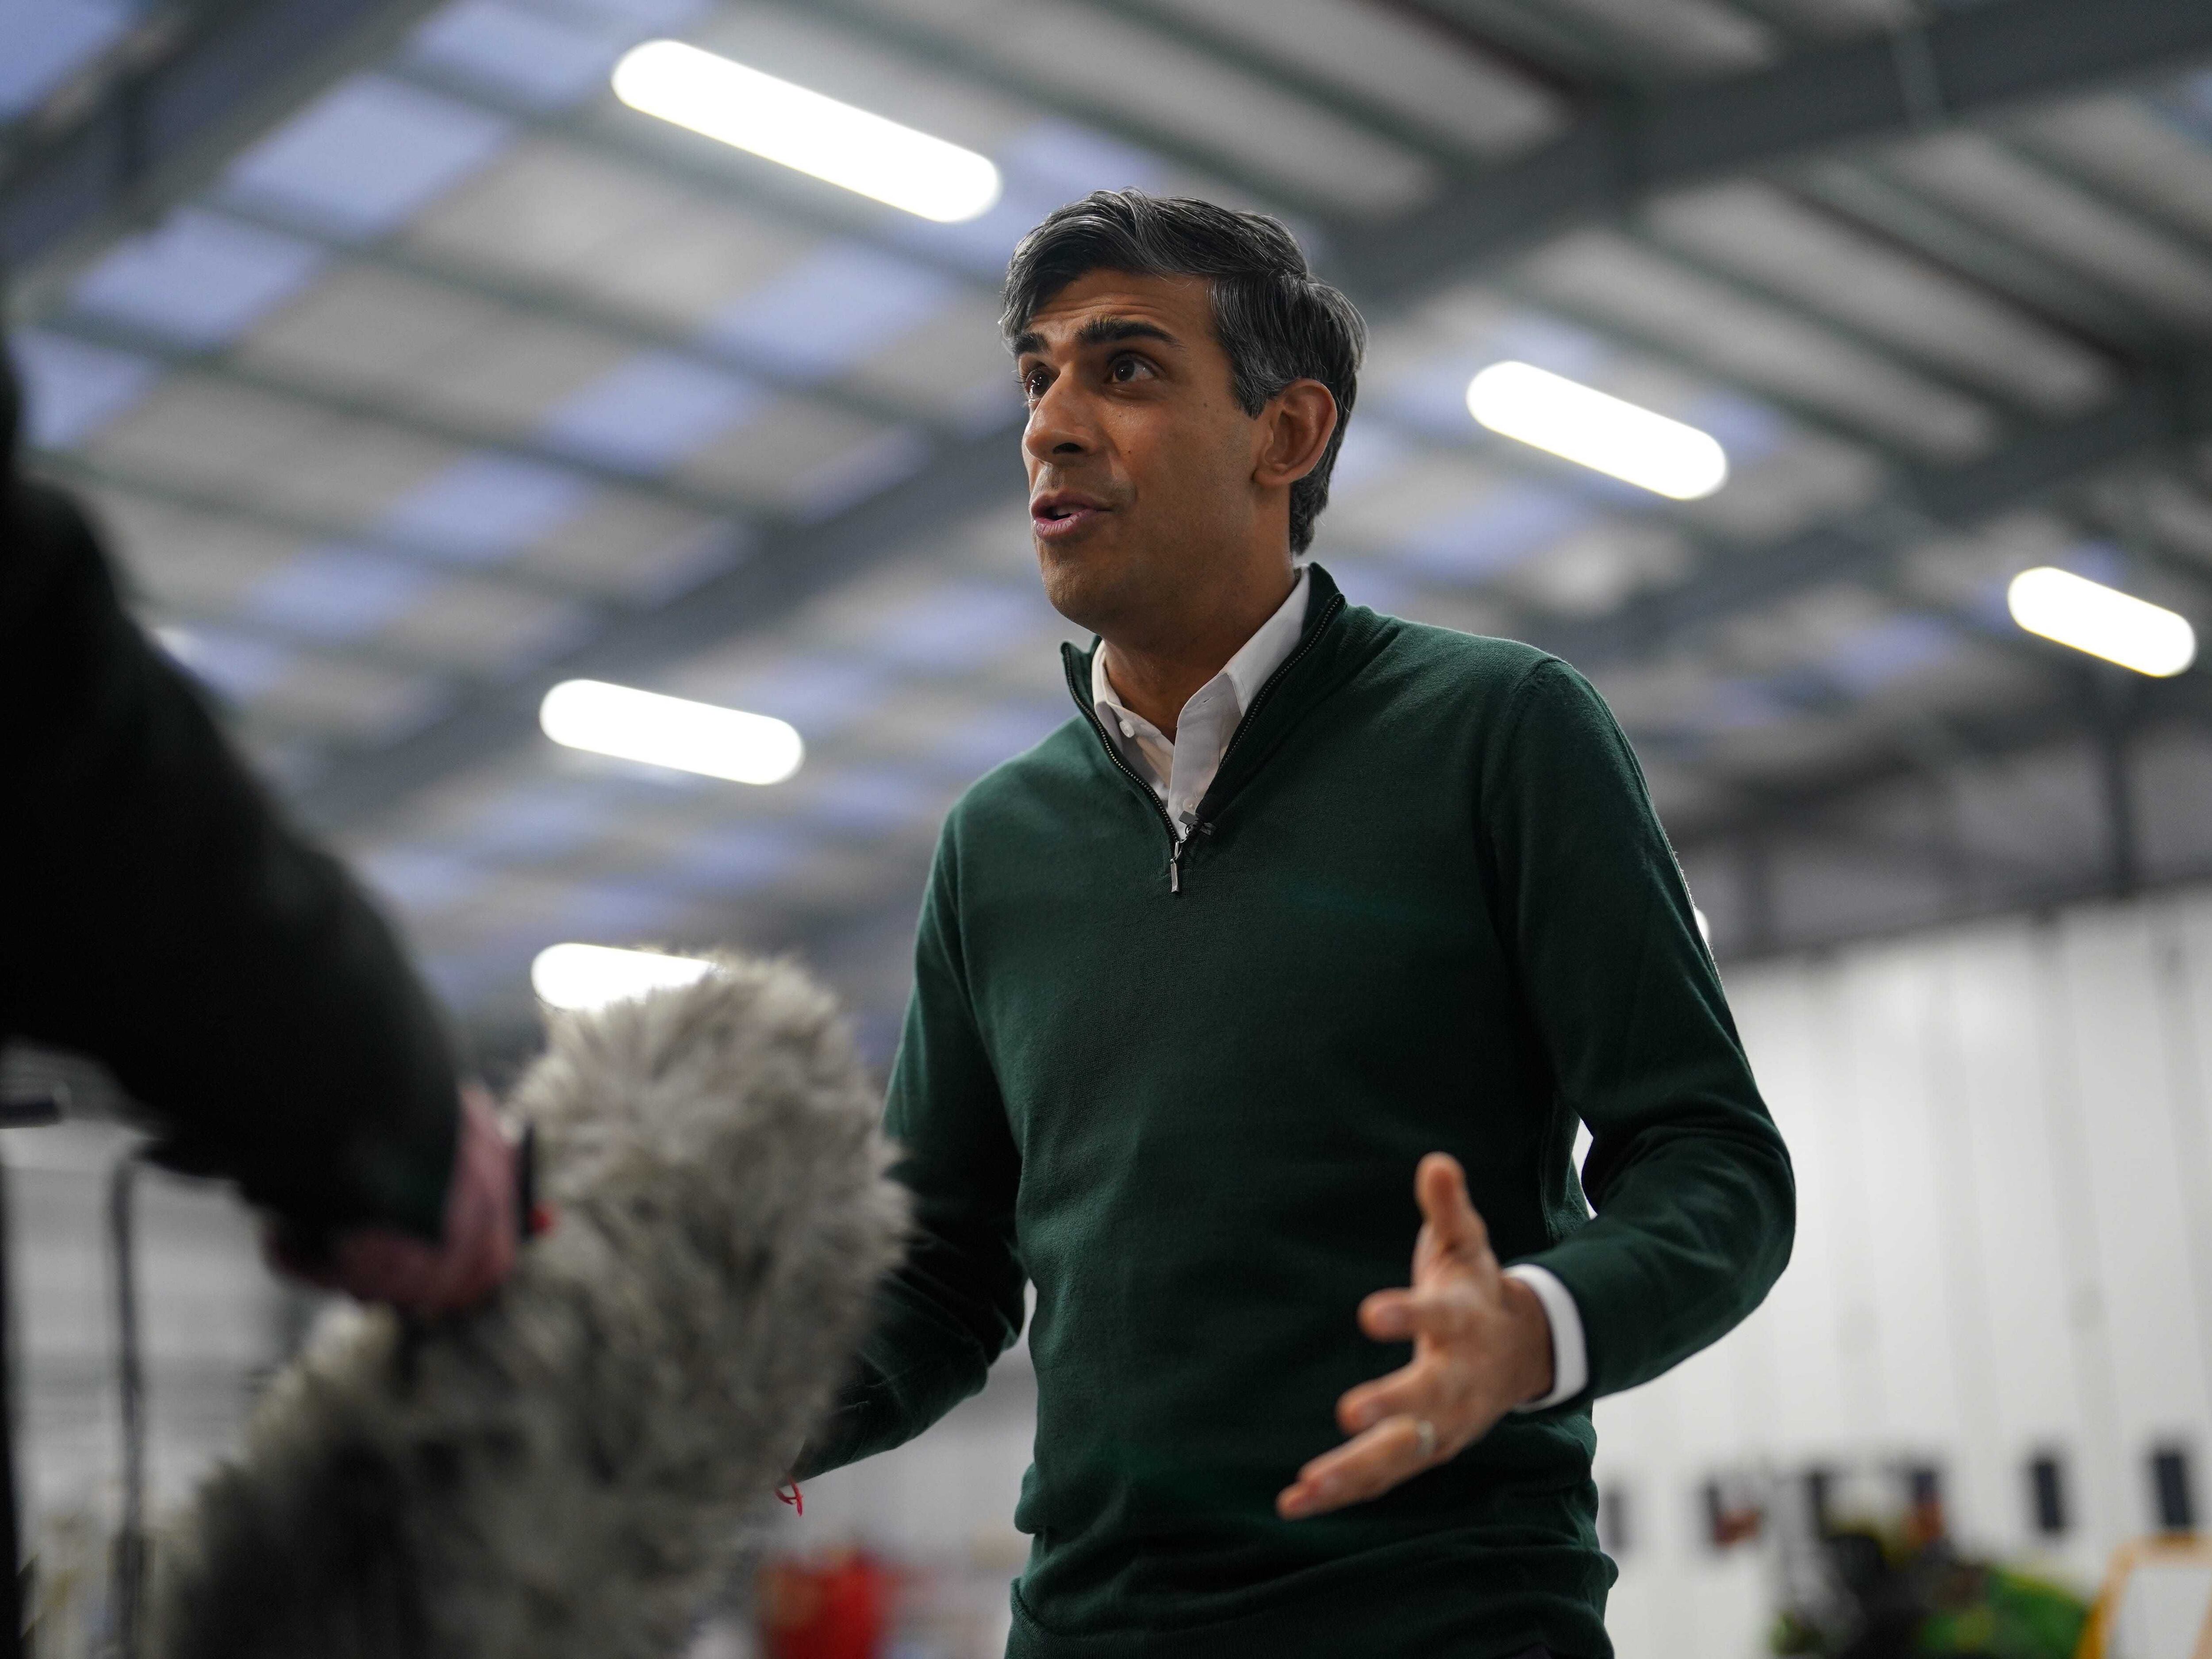 Sunak says barracks in his constituency ‘not right’ for large asylum centre